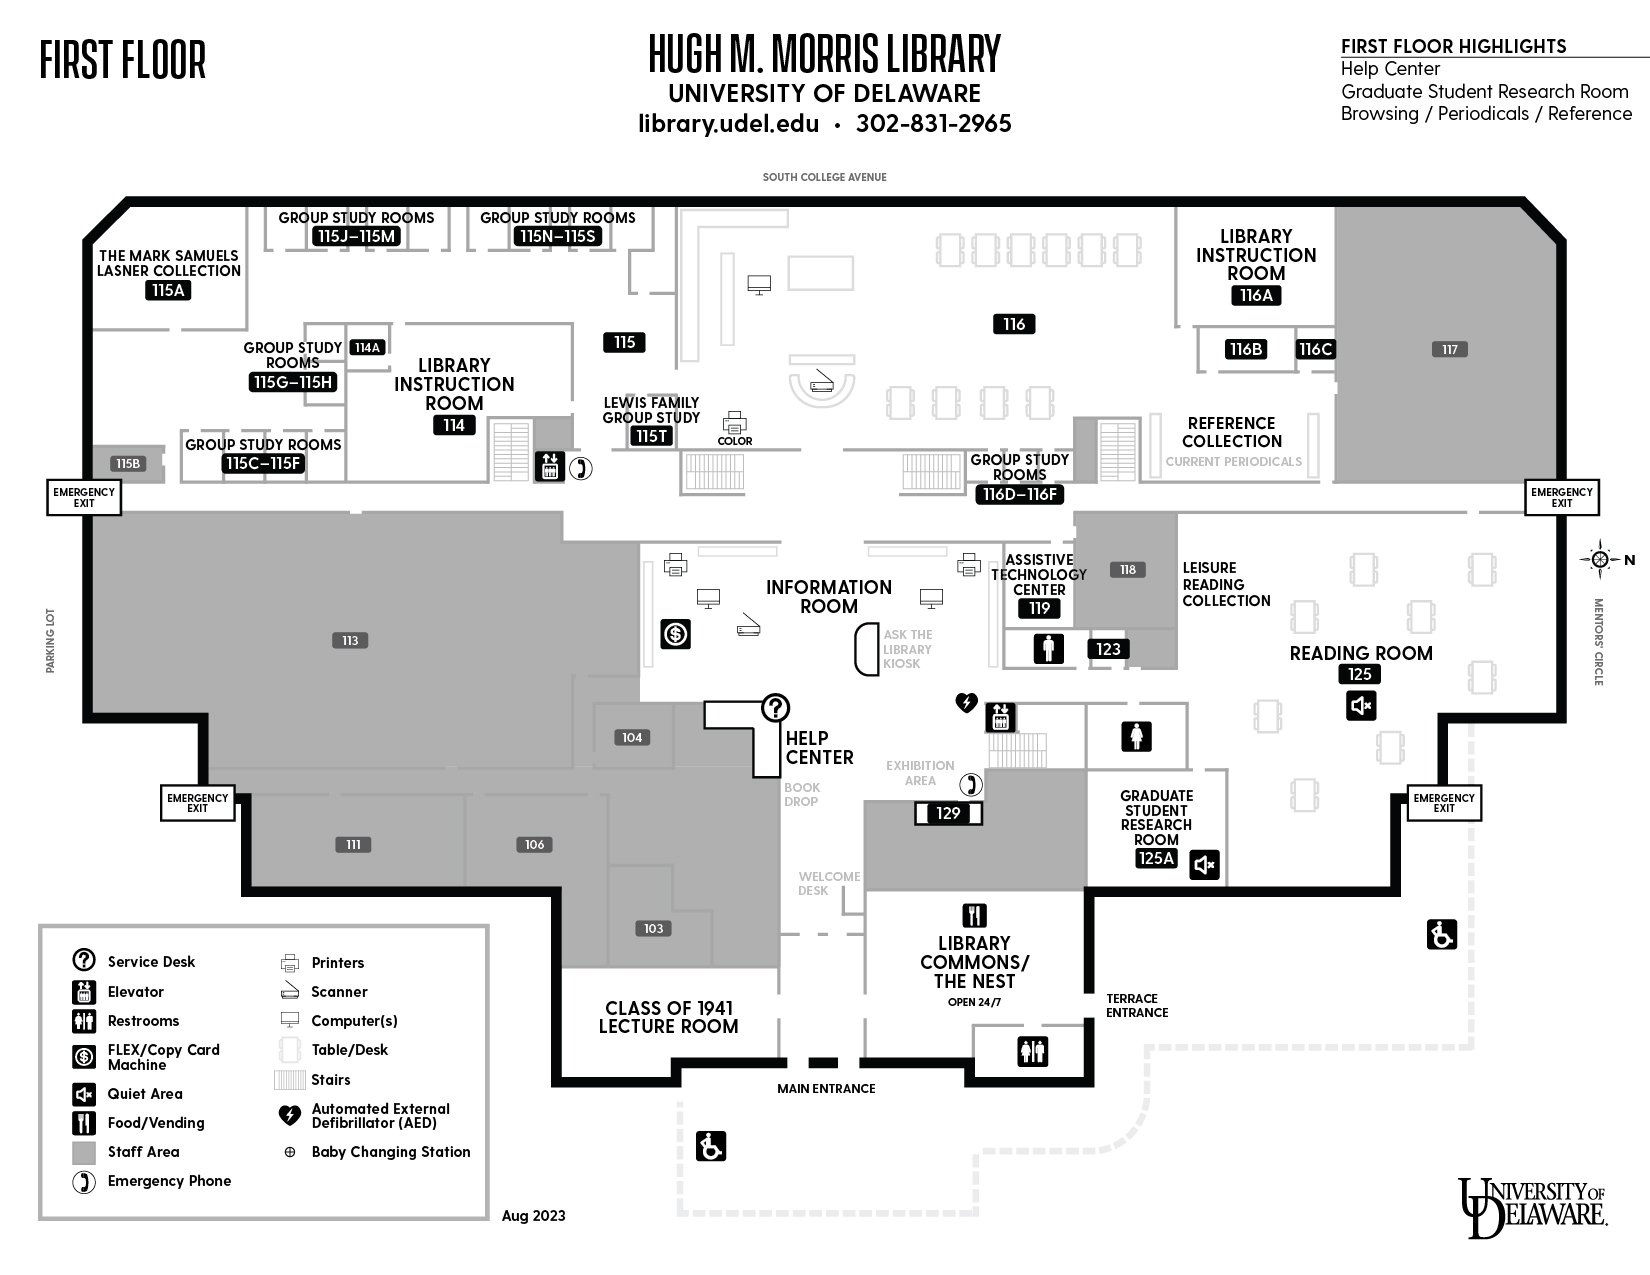 UD Library First Floor Map